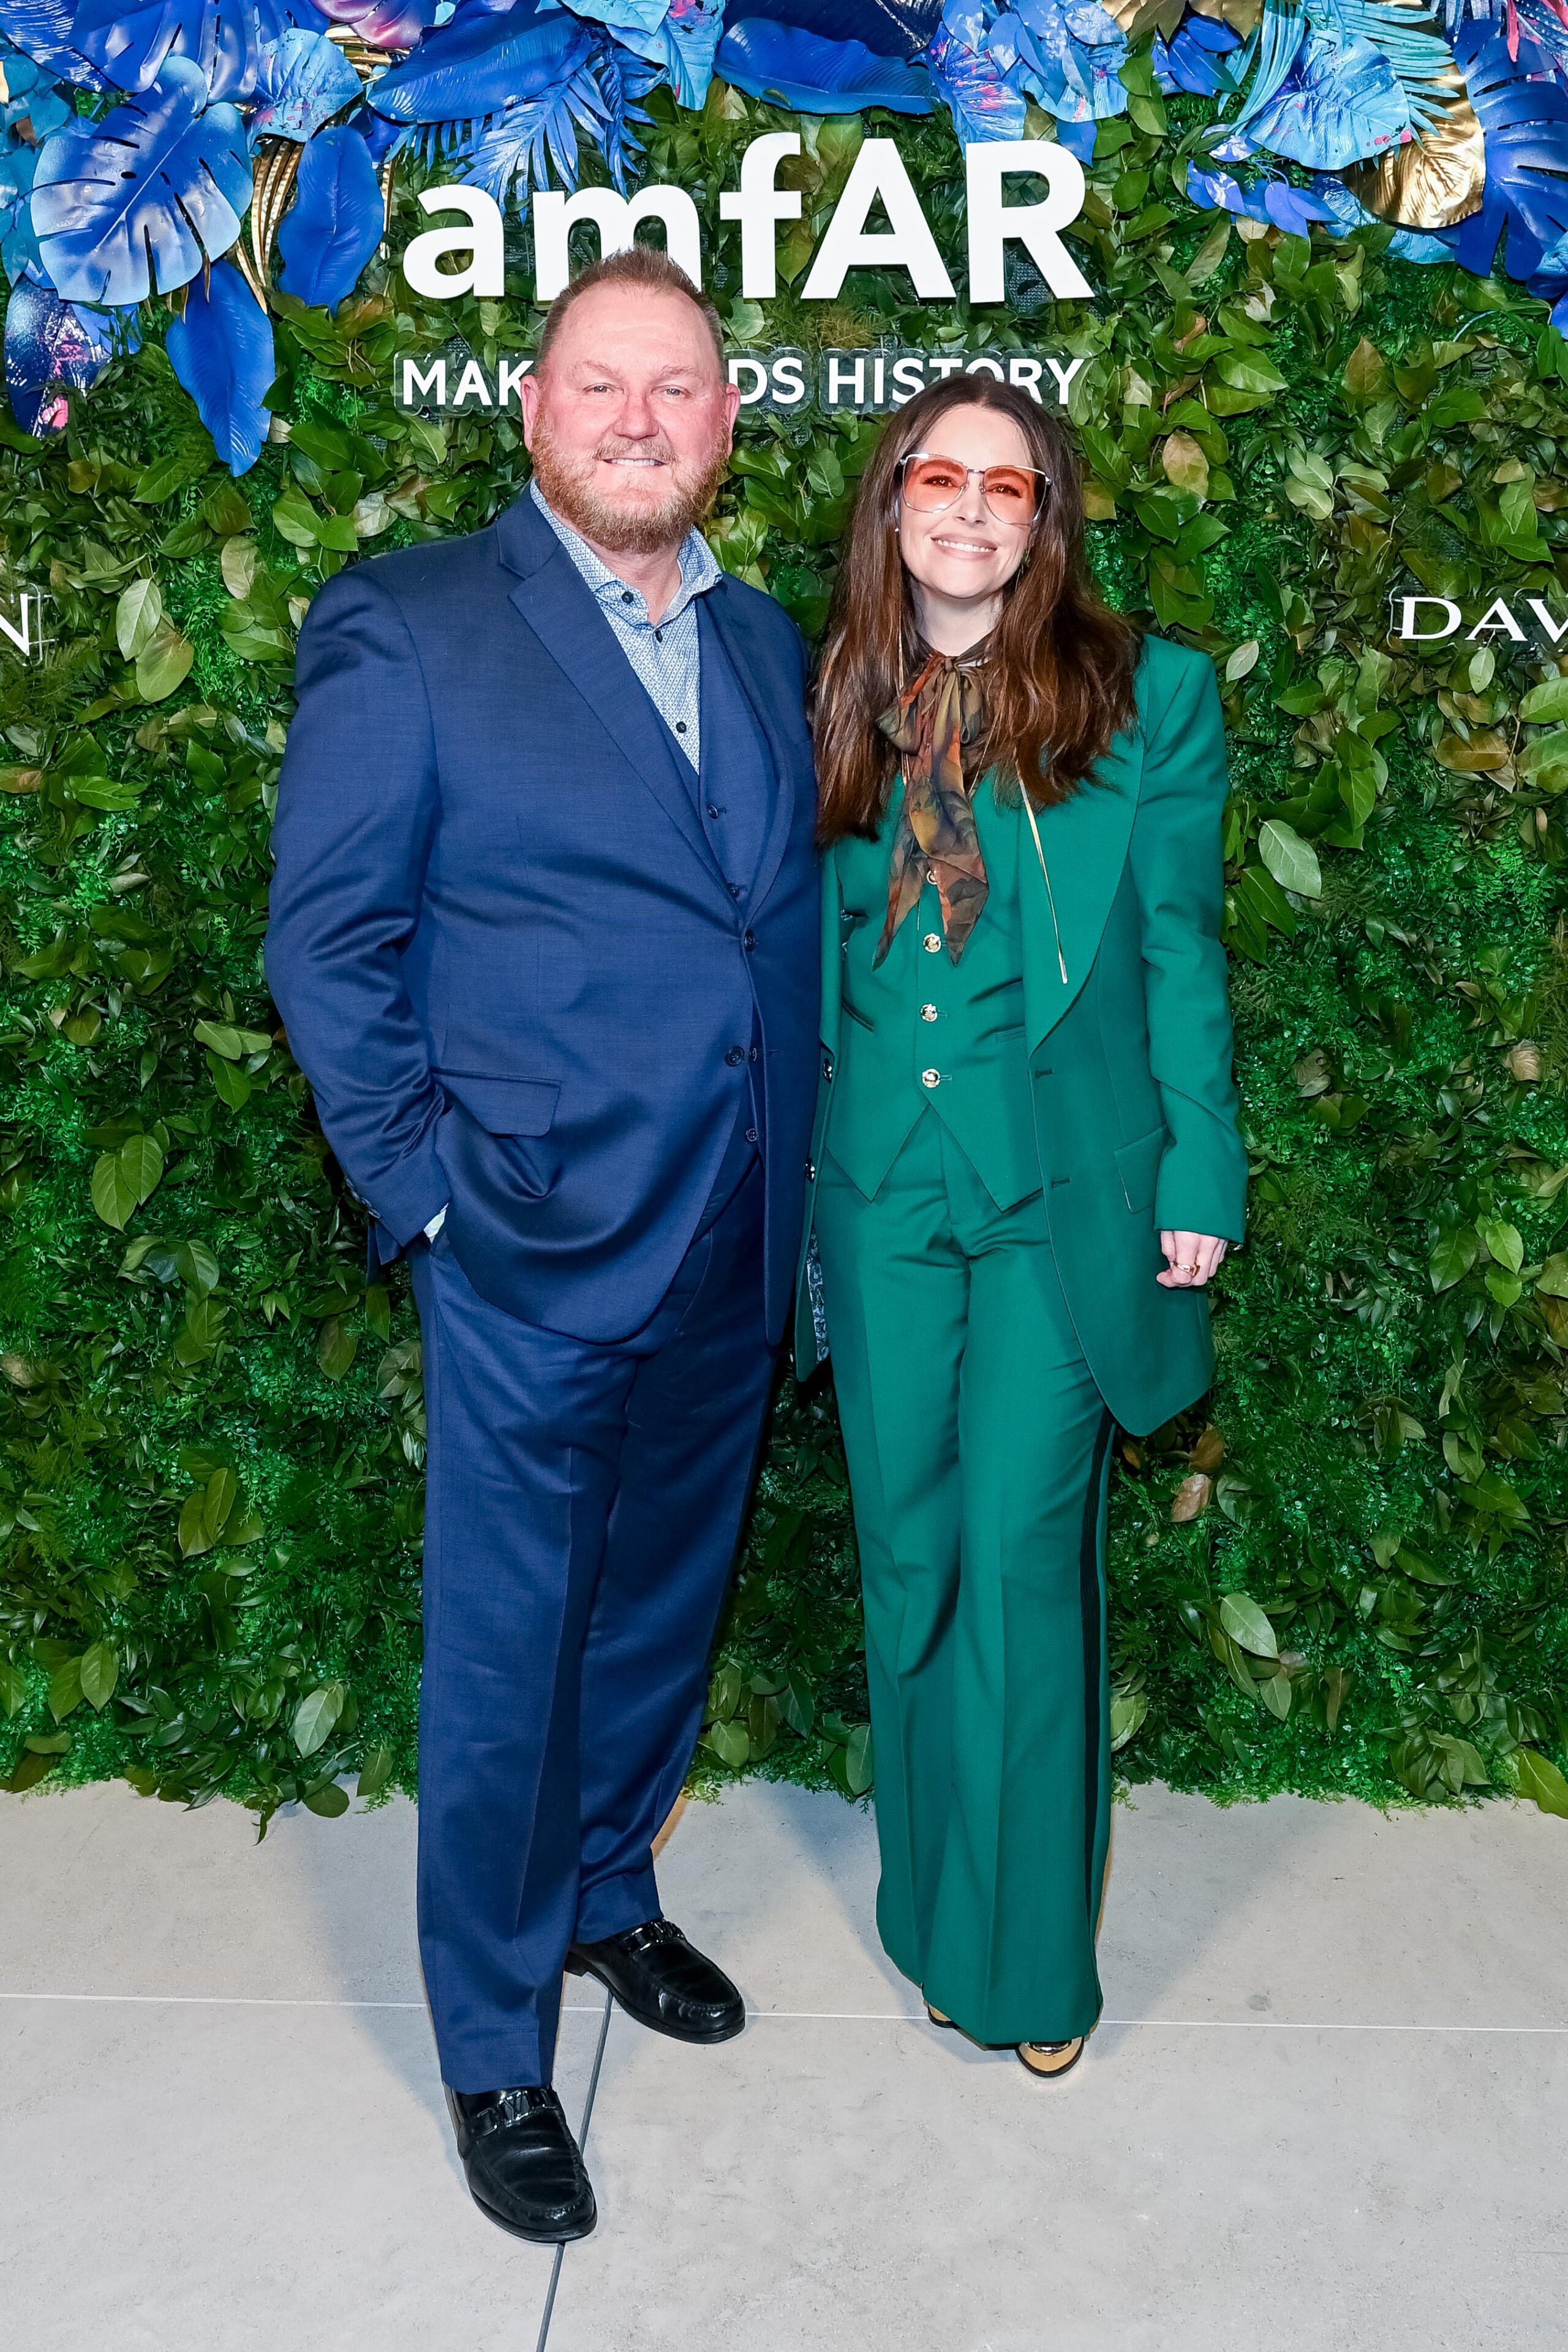 amfAR CEO Kevin Robert Frost and Emily Hampshire